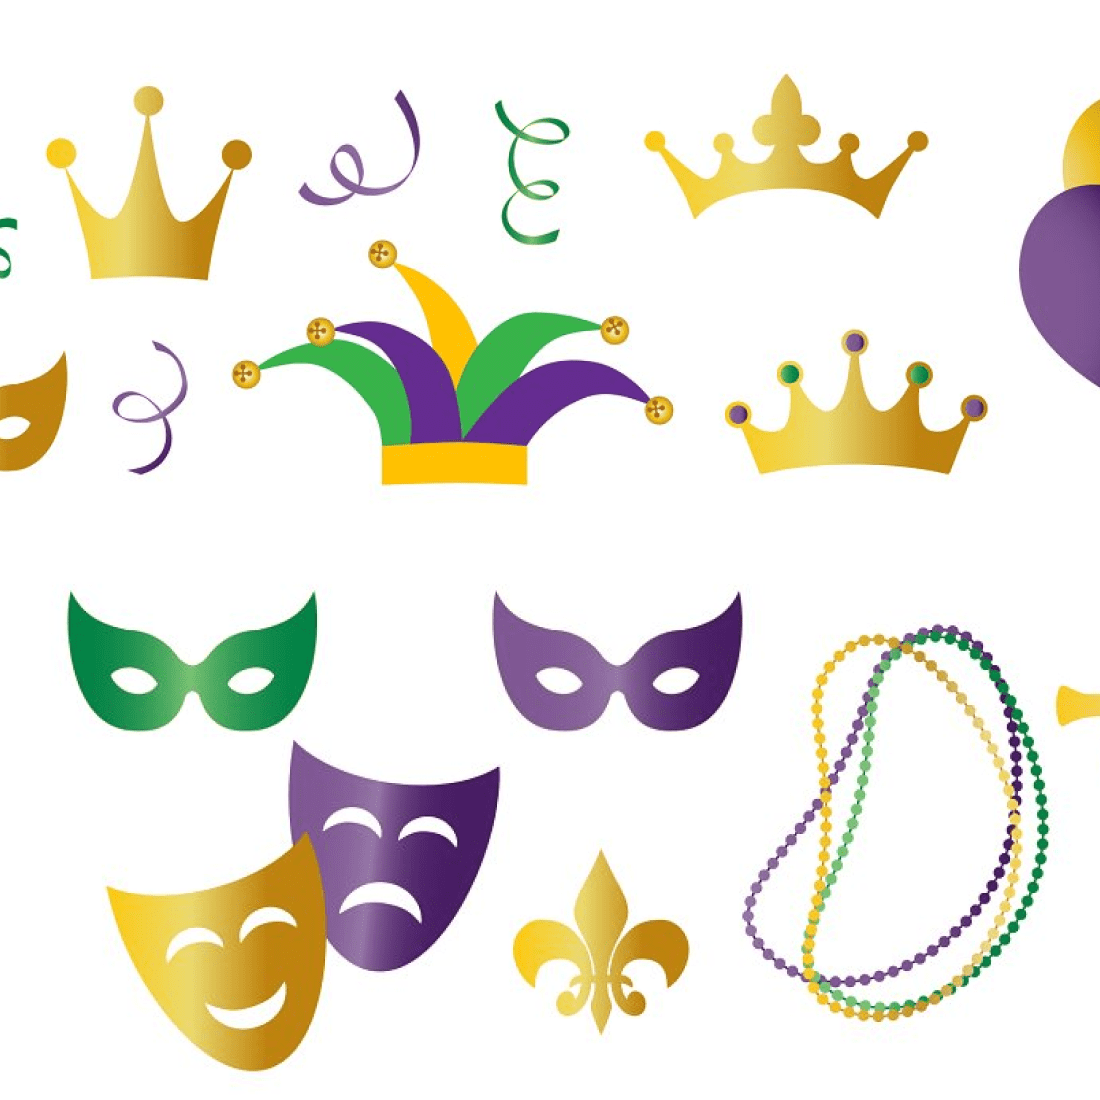 Masks with a happy and sad face, mysterious masks for celebrating Mardi Gras.